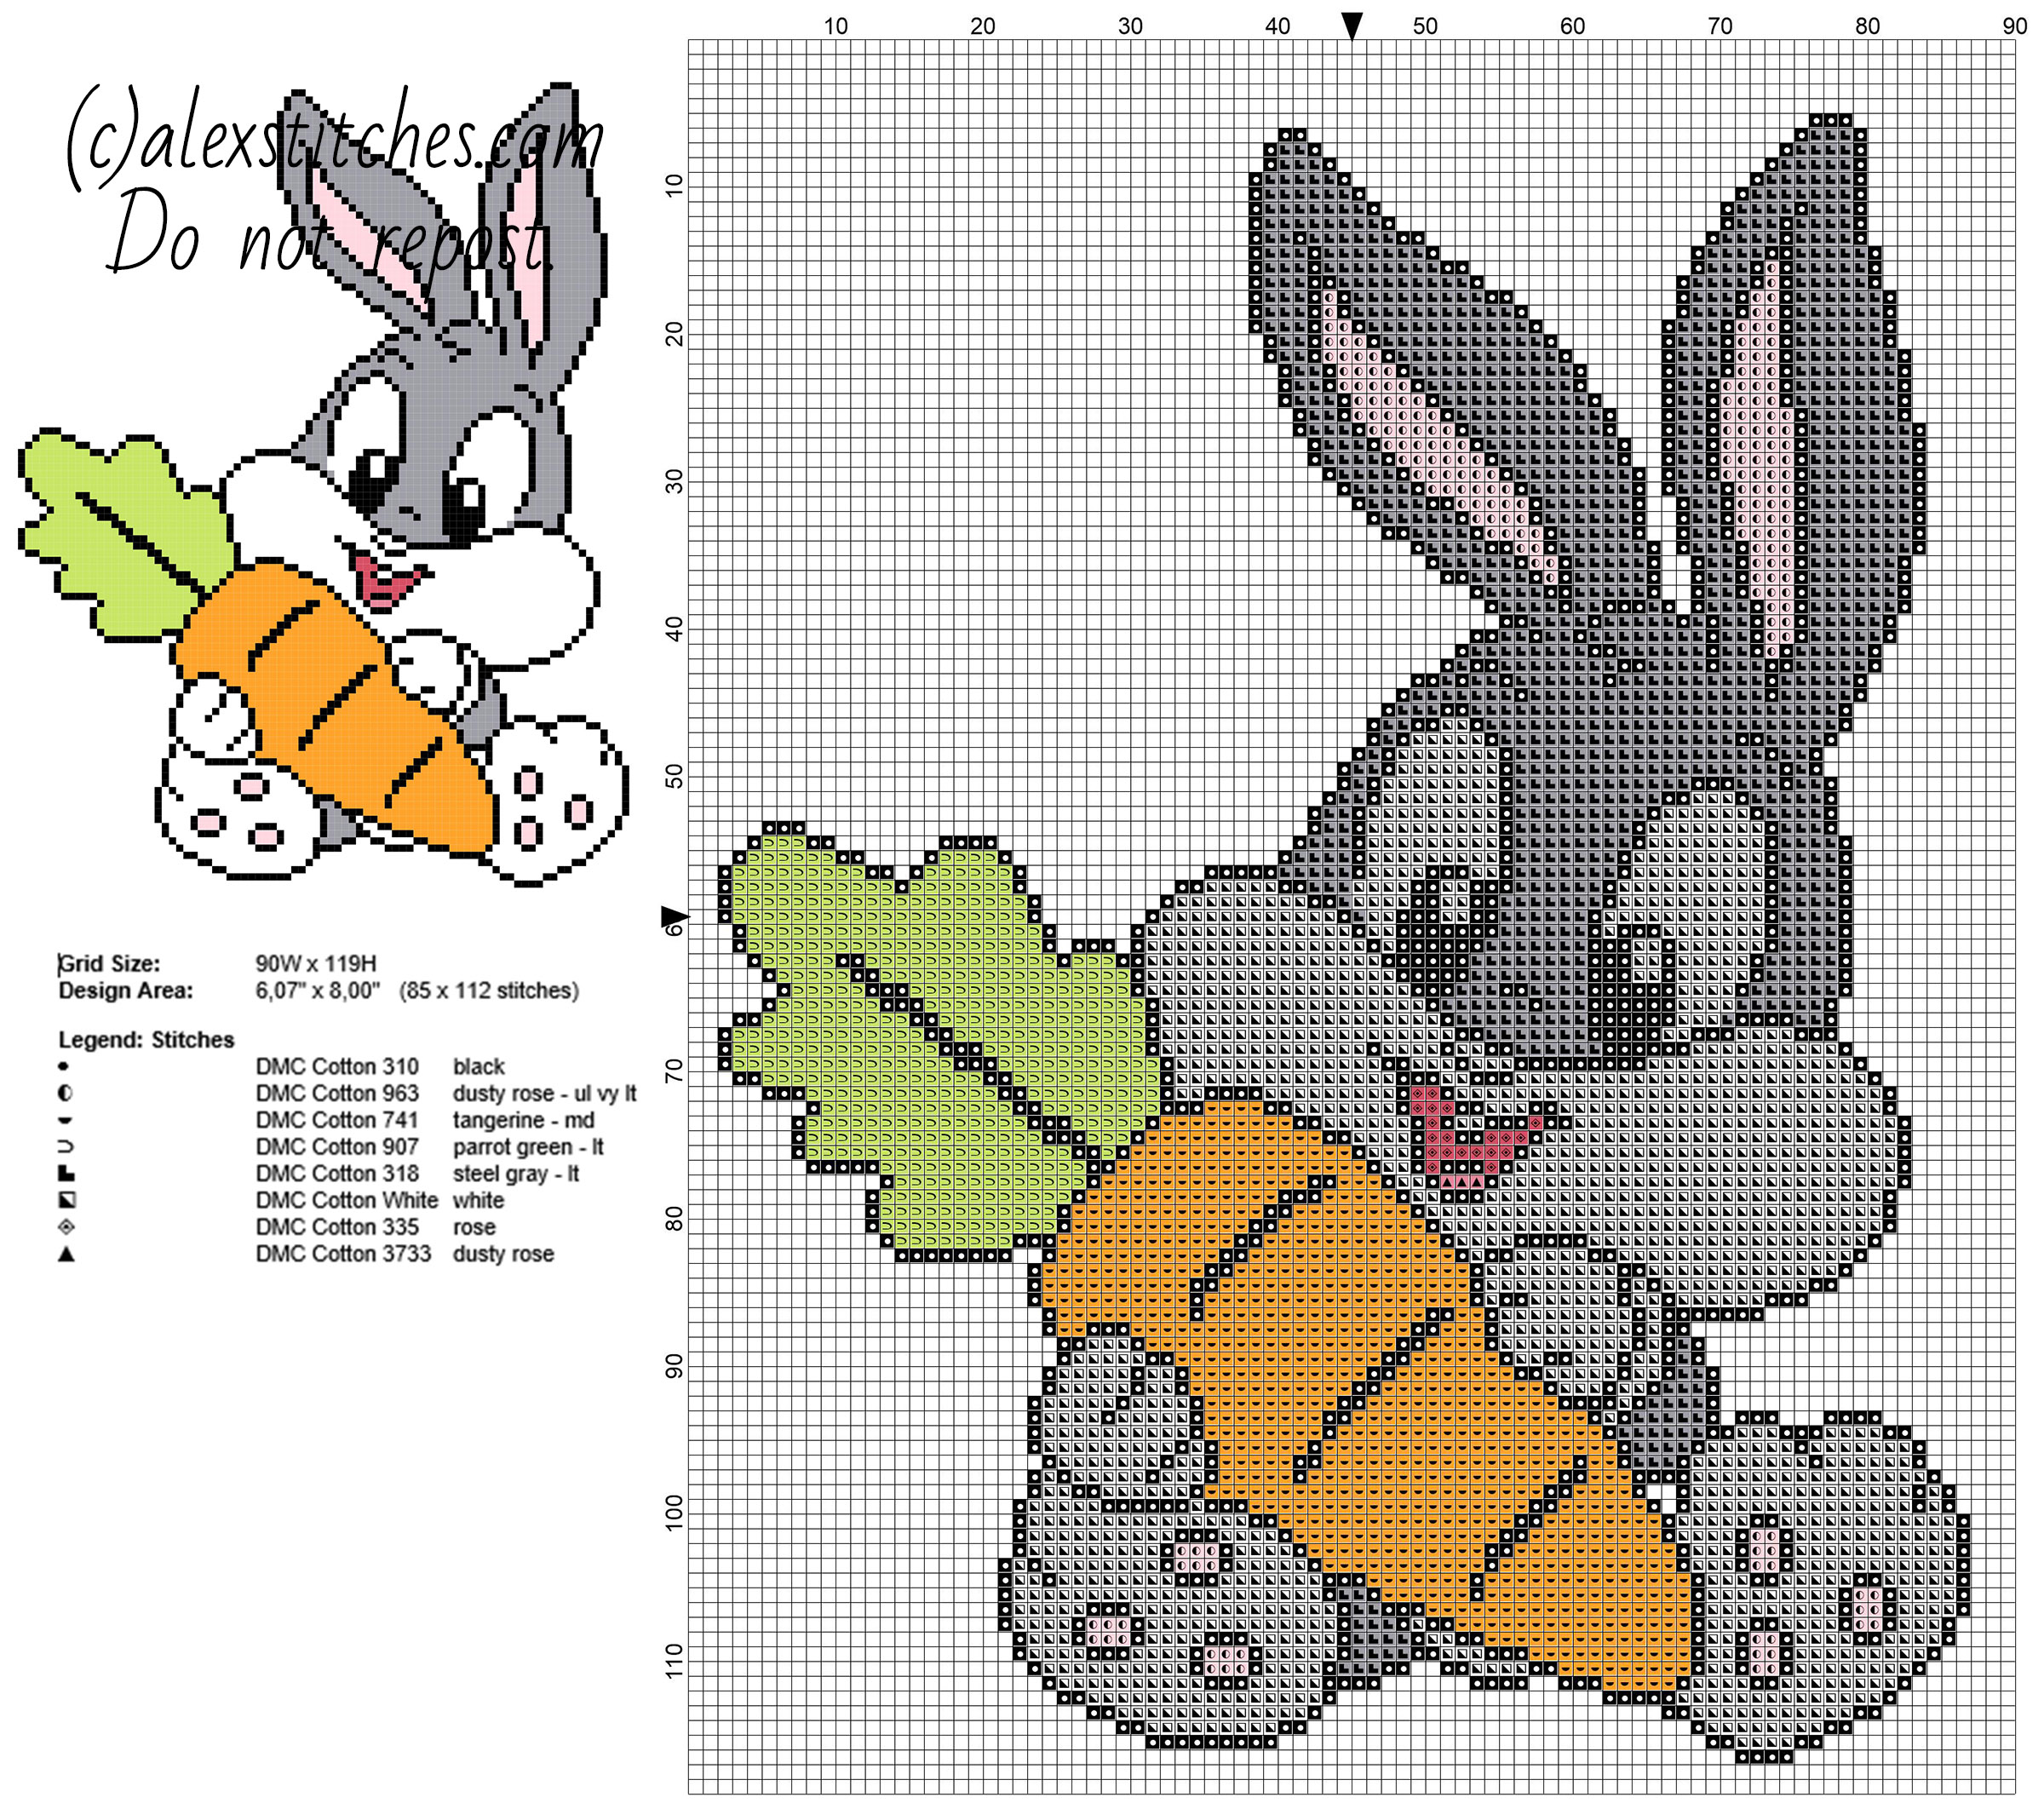 Baby Bugs Bunny with carrot Looney Tunes cartoons character free cross stitch pattern